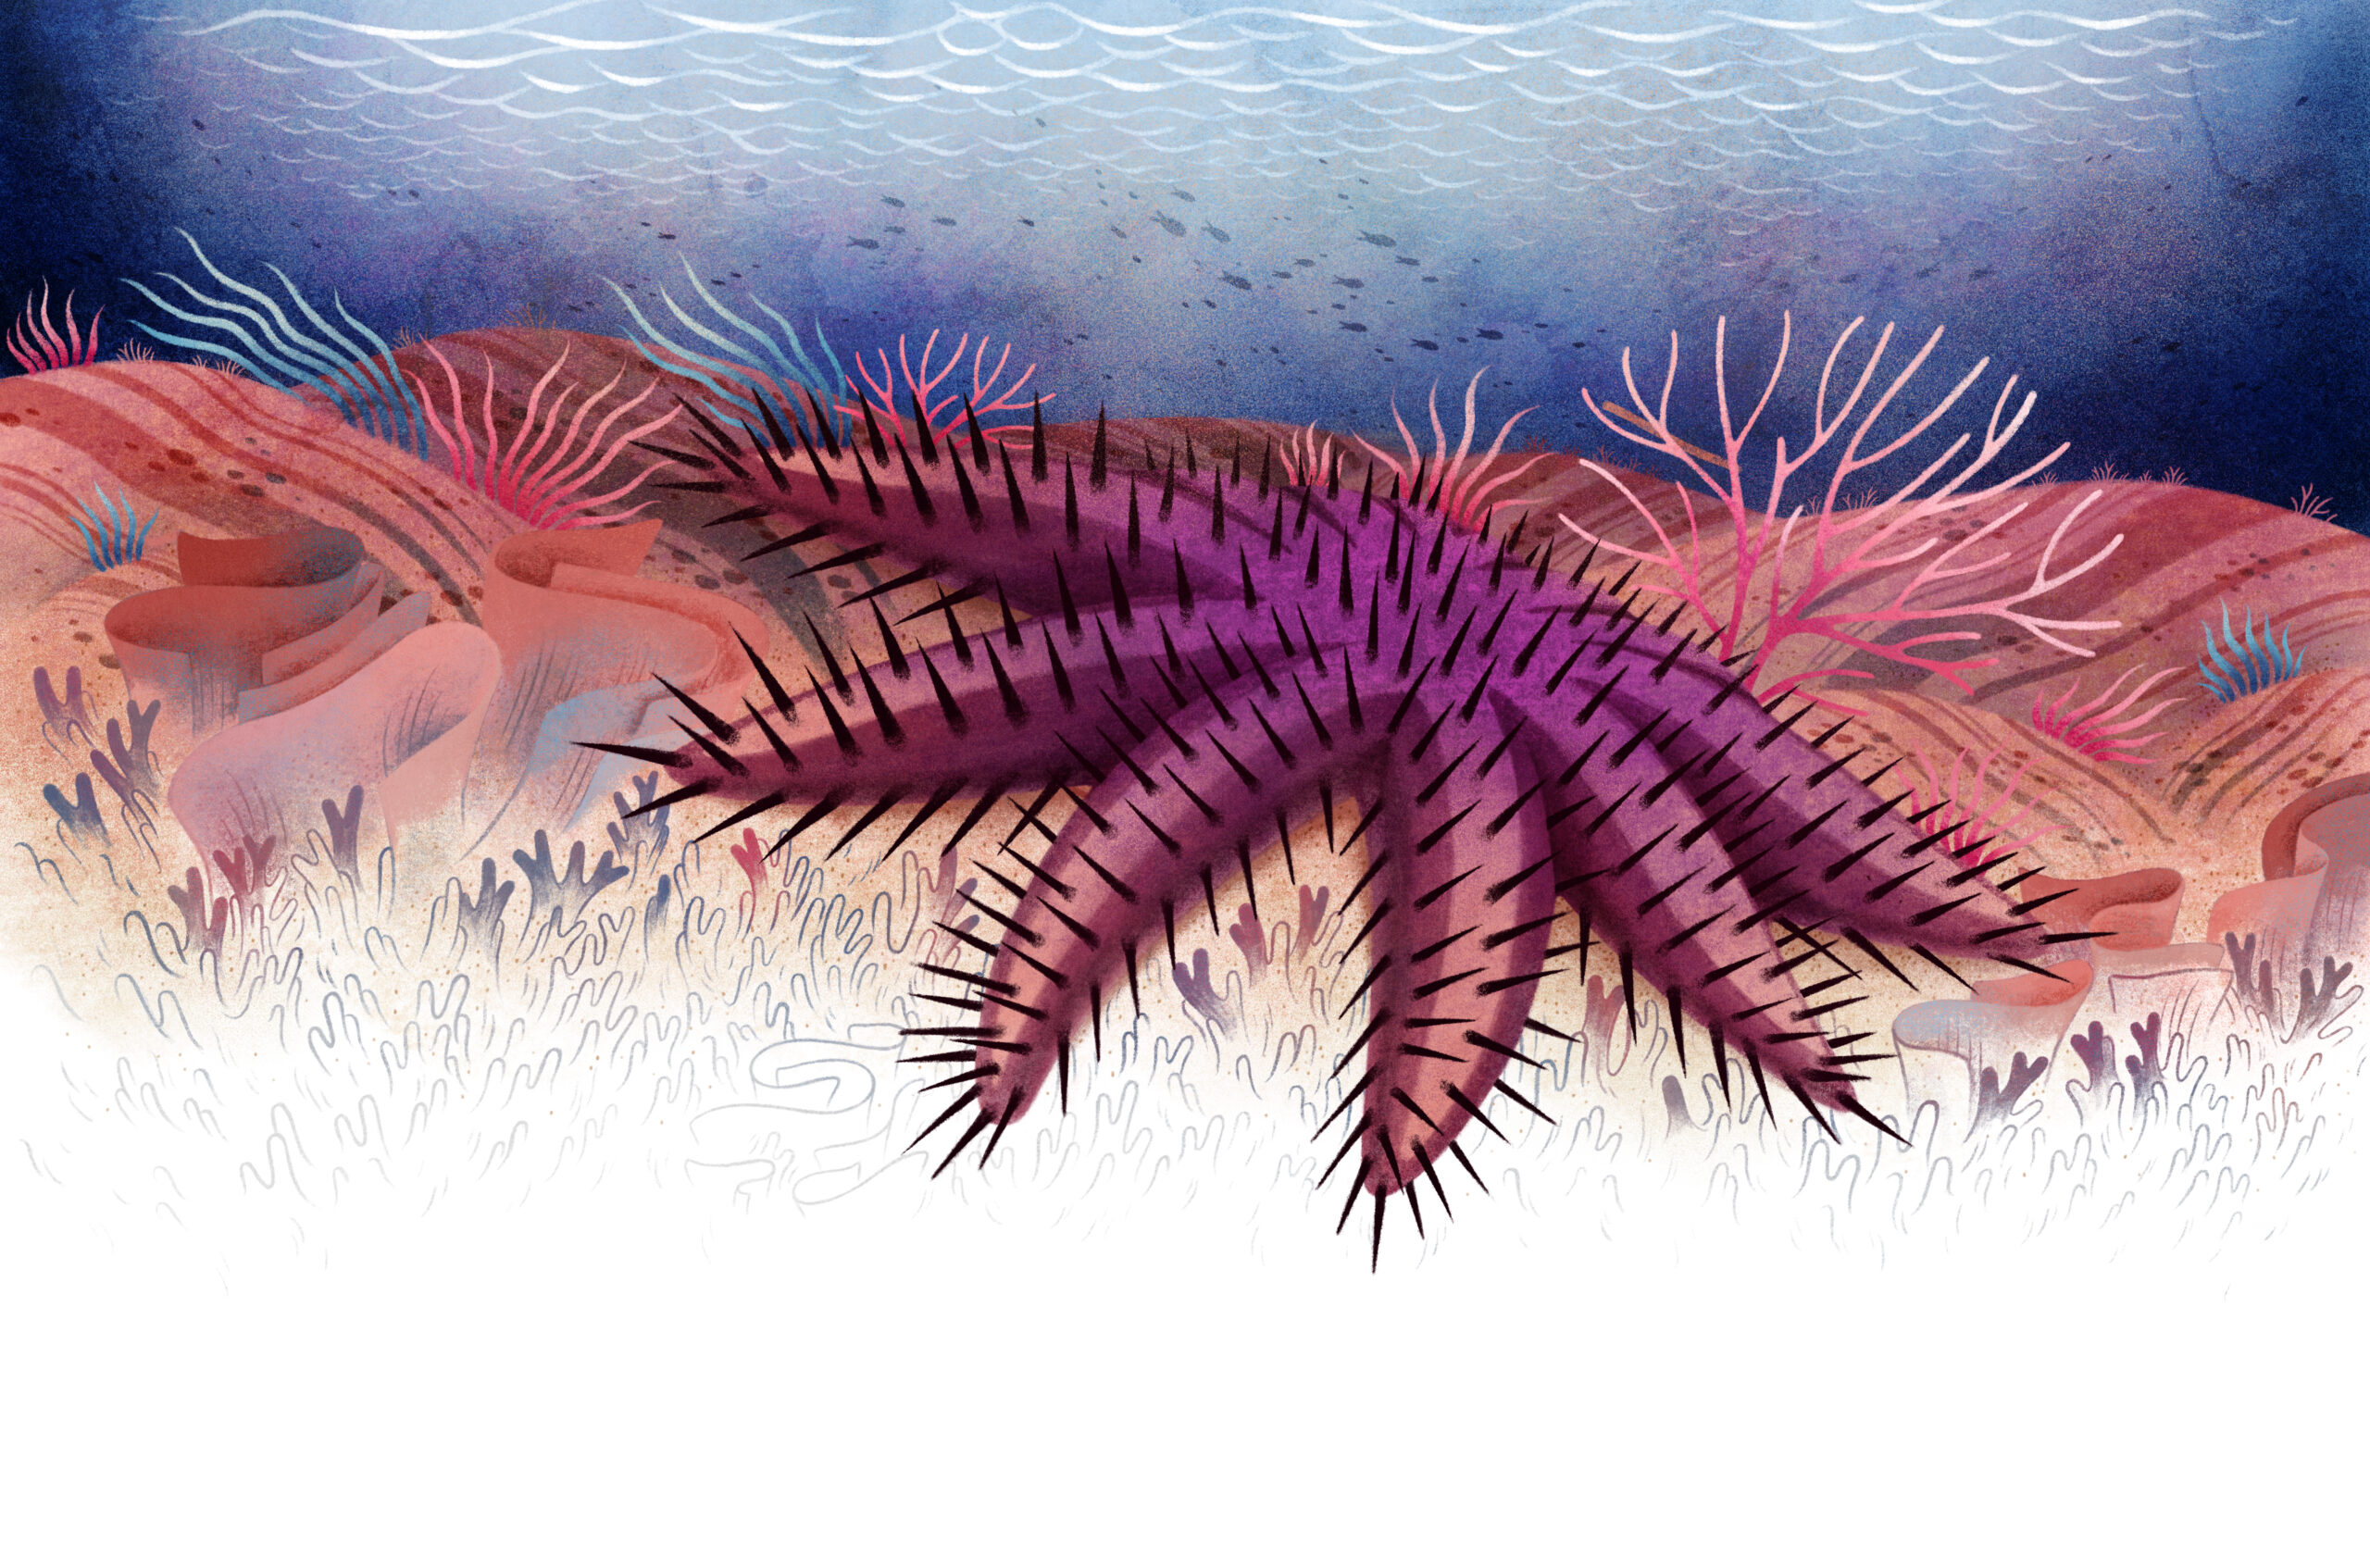 Illustration of a crown of thorn starfish extending its reach over a bed of coral reefs.